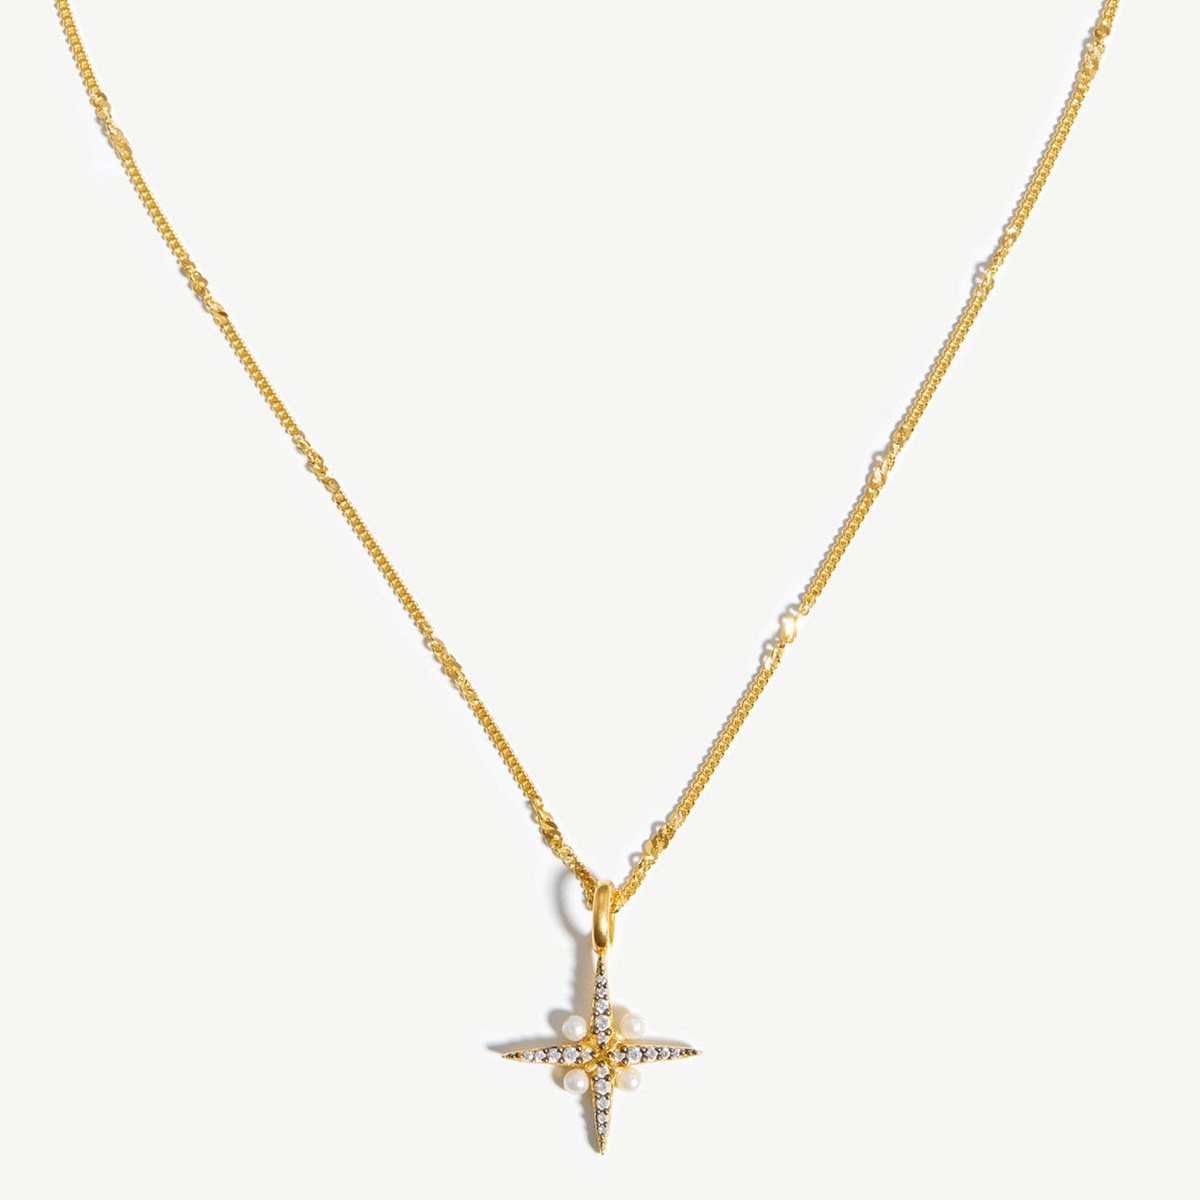 Custom wholesale jewelry harris reed north star necklace18k gold plated vermeil pearl